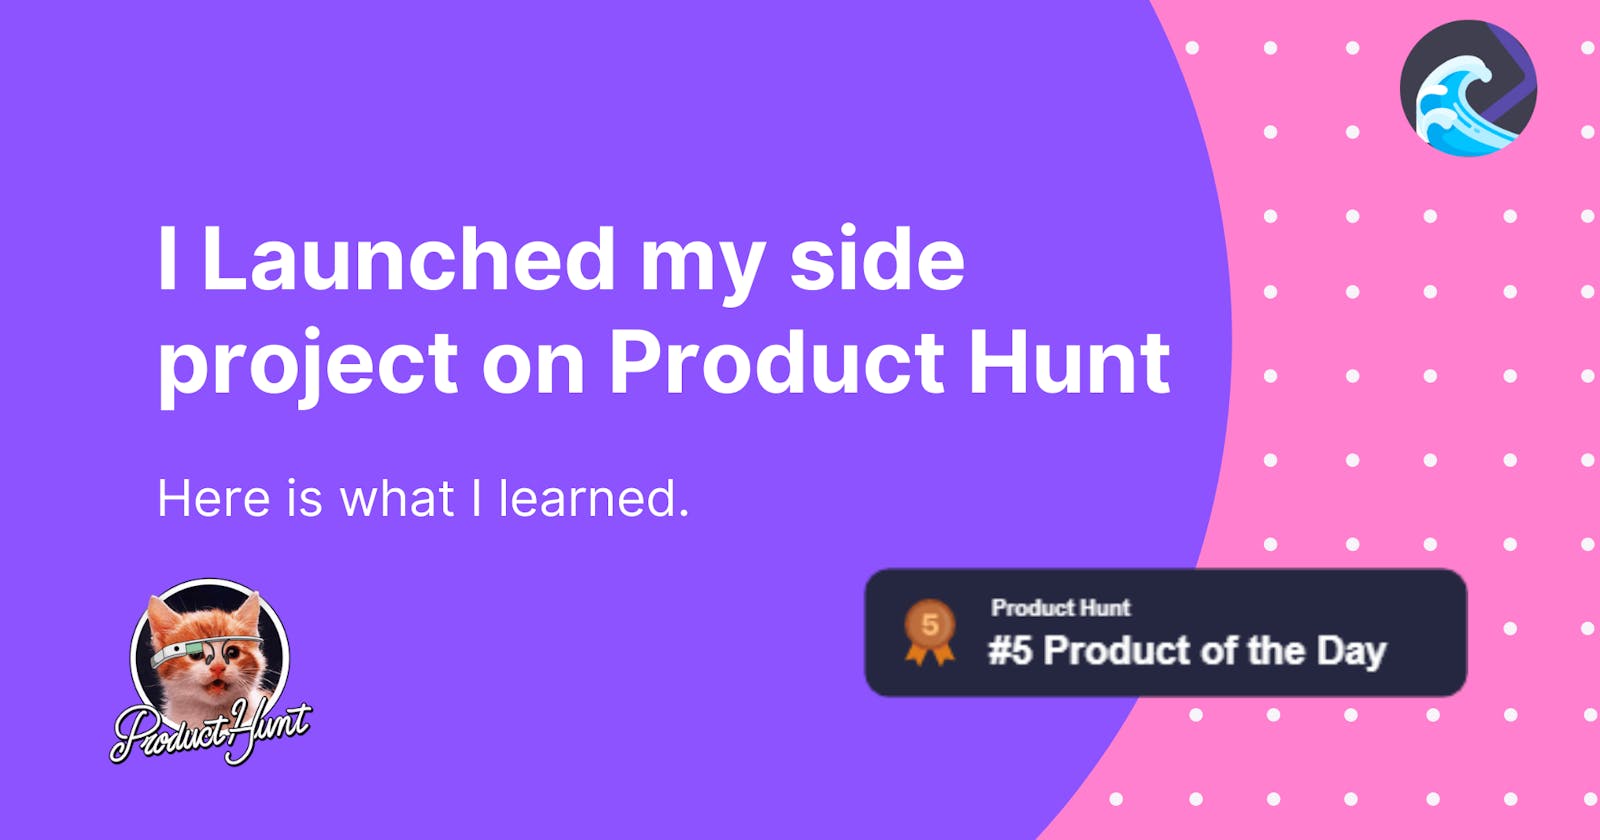 I Launched my side project on Product Hunt, here is what I learned.